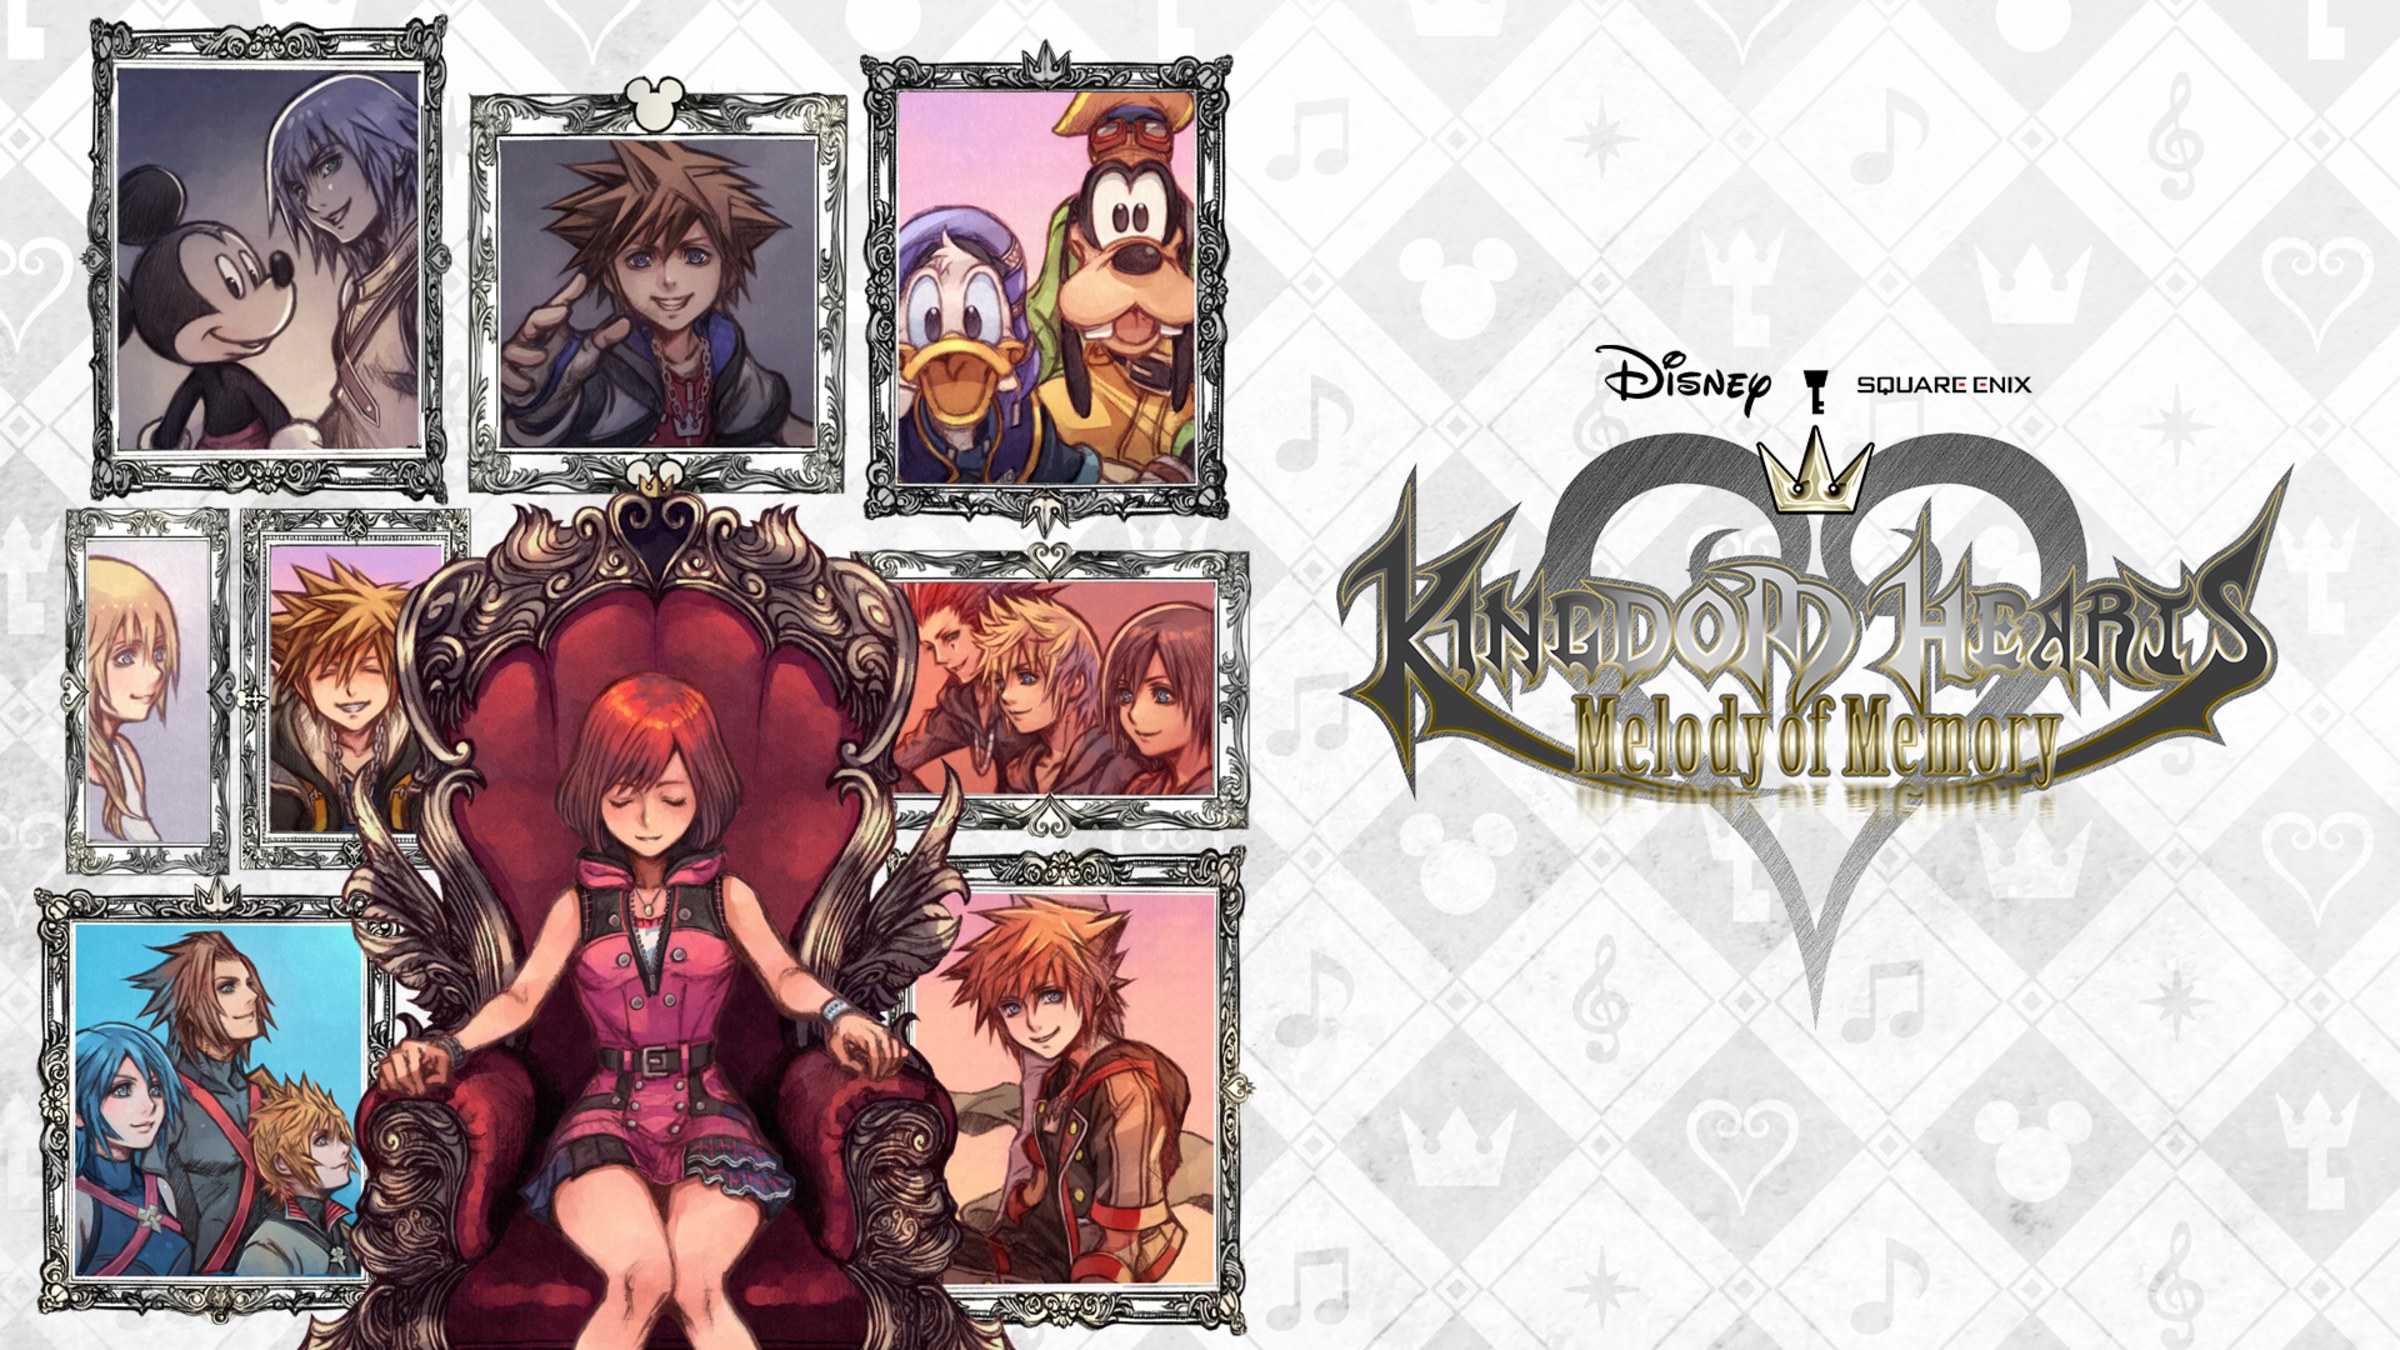 initial Matematisk Kritik KINGDOM HEARTS Melody of Memory for Nintendo Switch - Nintendo Official Site